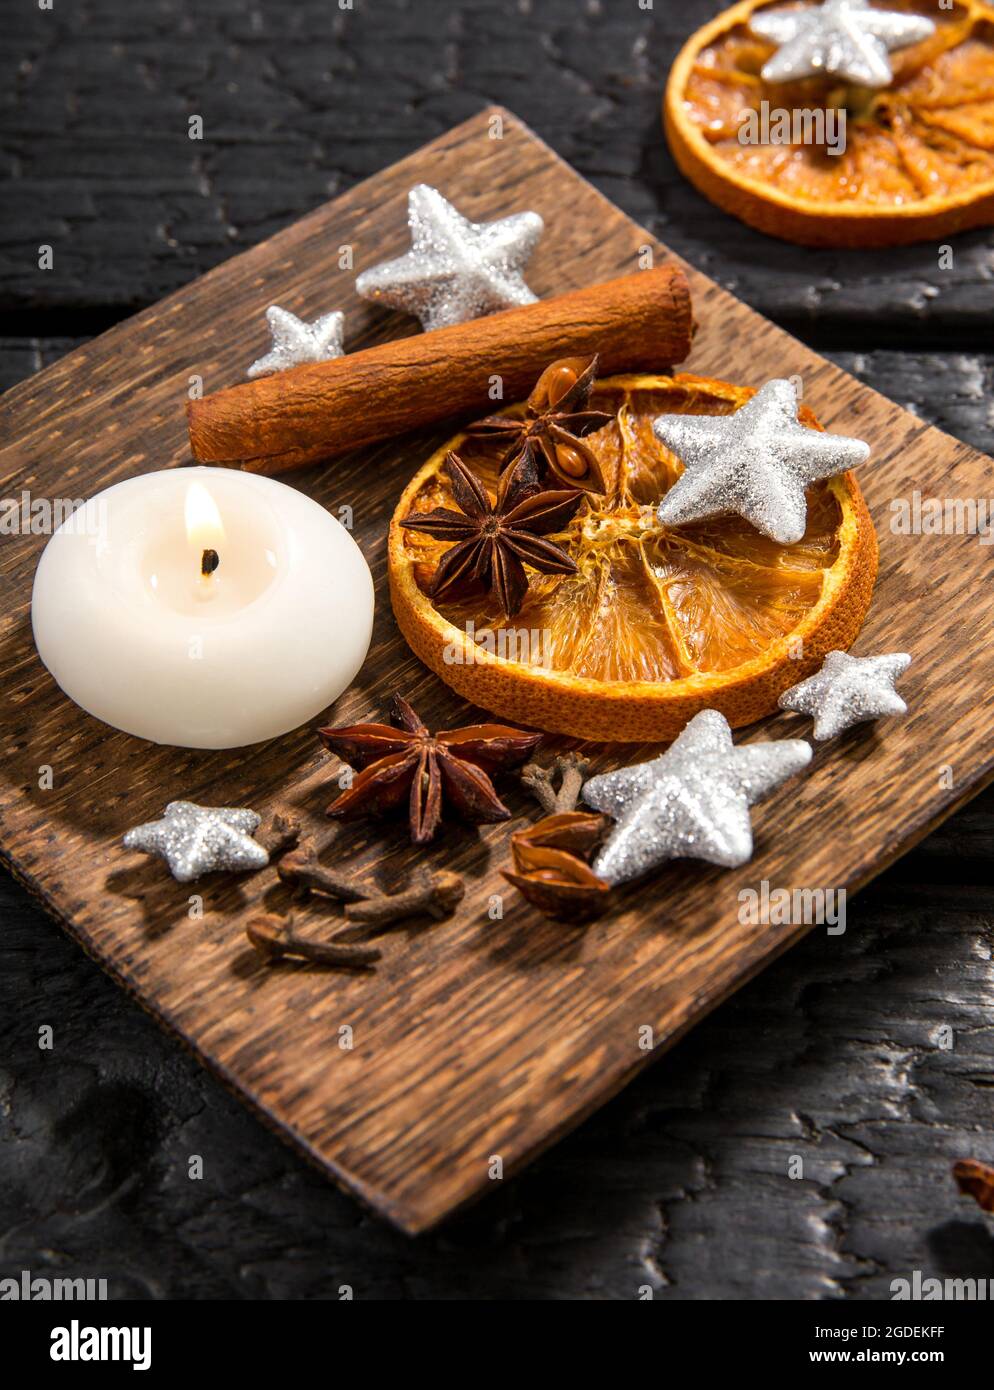 Winter relaxing aromatherapy. Side view of various spices: cinnamon stick, clove, star anise, dried orange slices. Wood tray with seasonal potpourri o Stock Photo